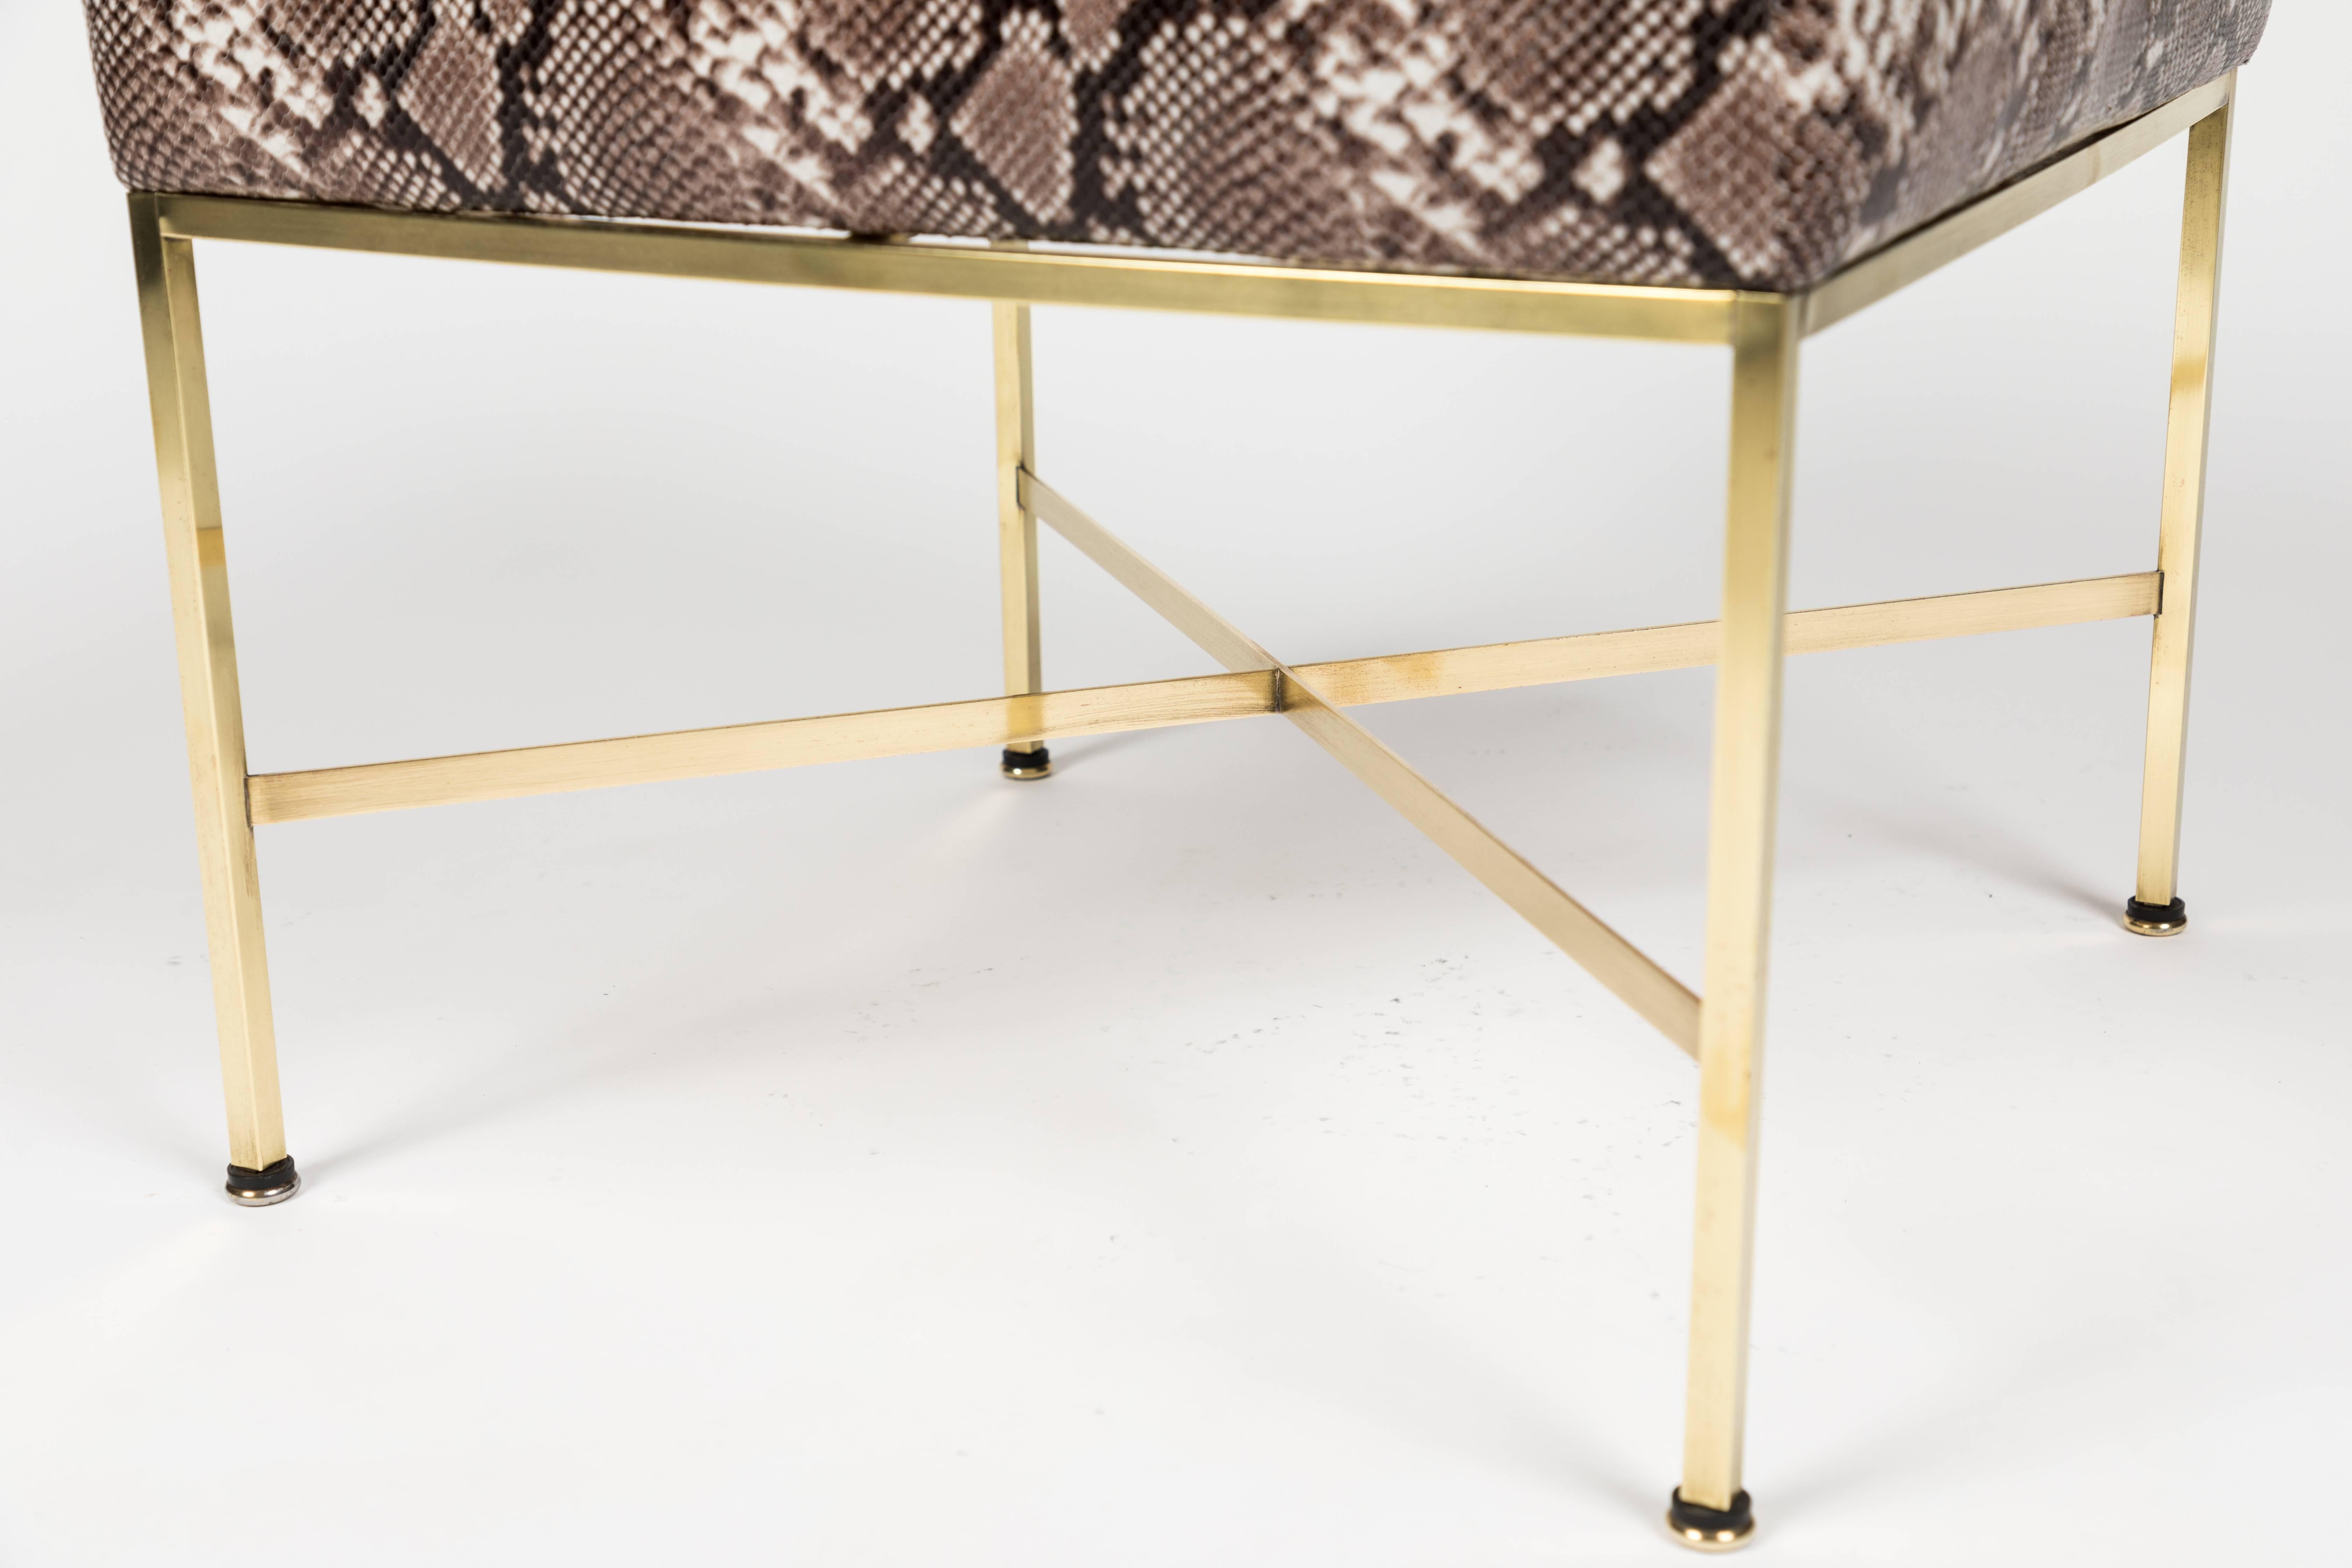 Polished Pair of Brass and Python-Printed Leather Stools by Paul McCobb